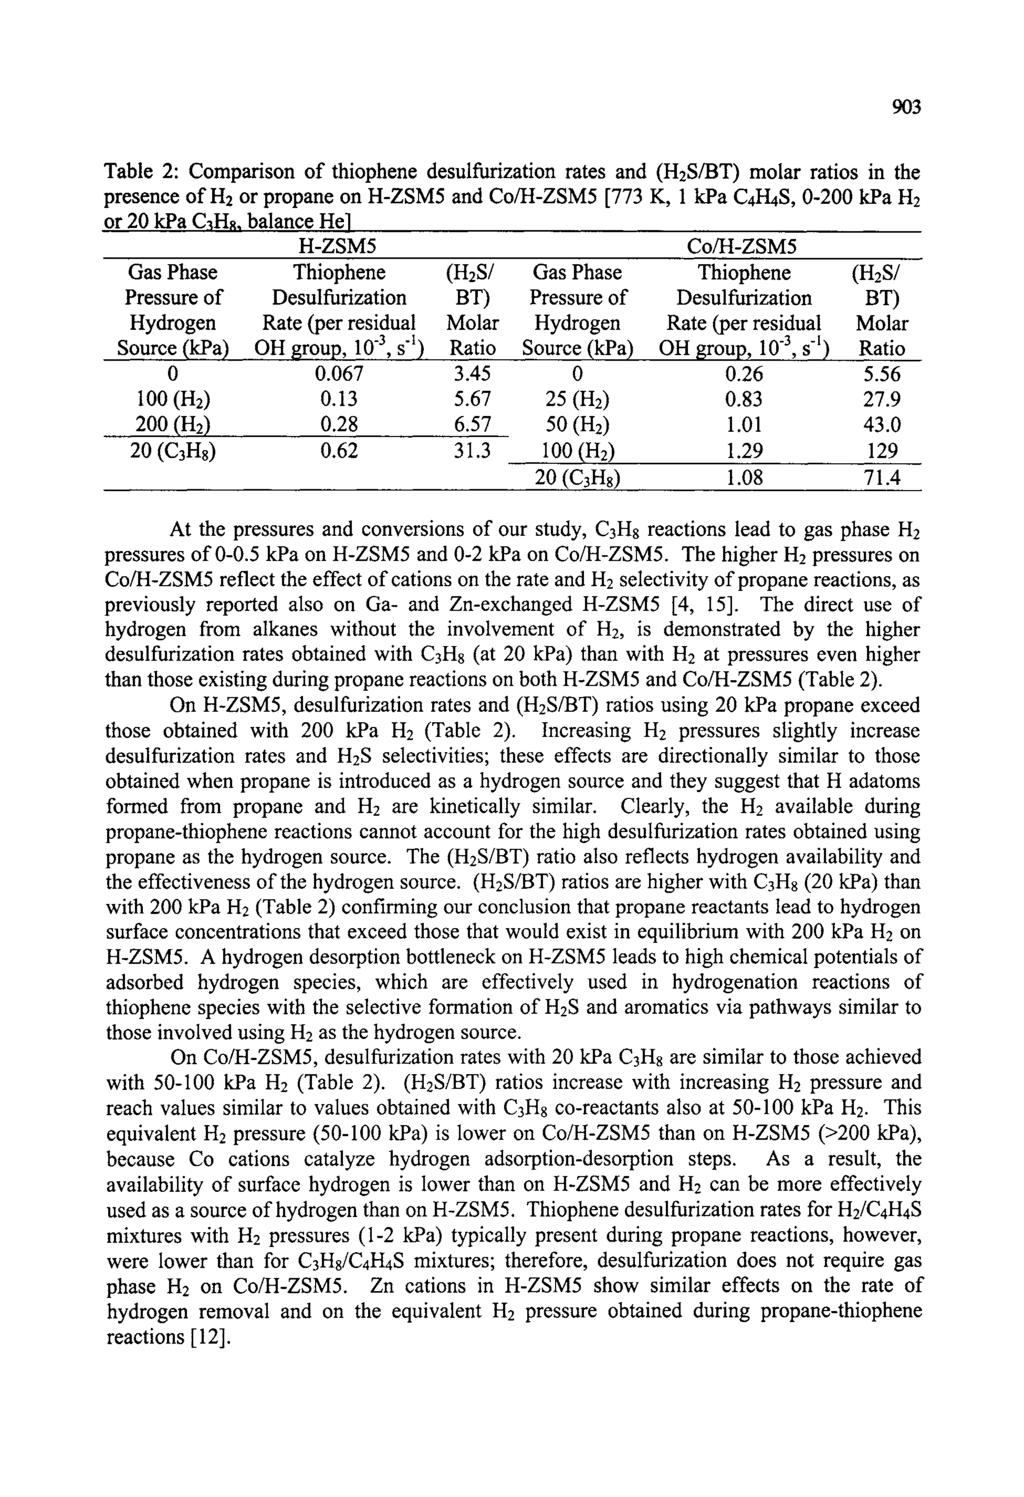 903 Table 2: Comparison of thiophene desulfurization rates and (H2S/BT) molar ratios in the presence of H2 or propane on H-ZSM5 and Co/H-ZSM5 [773 K, 1 kpa C4H4S, 0-200 kpa H2 or 20 kpa C3H8, balance